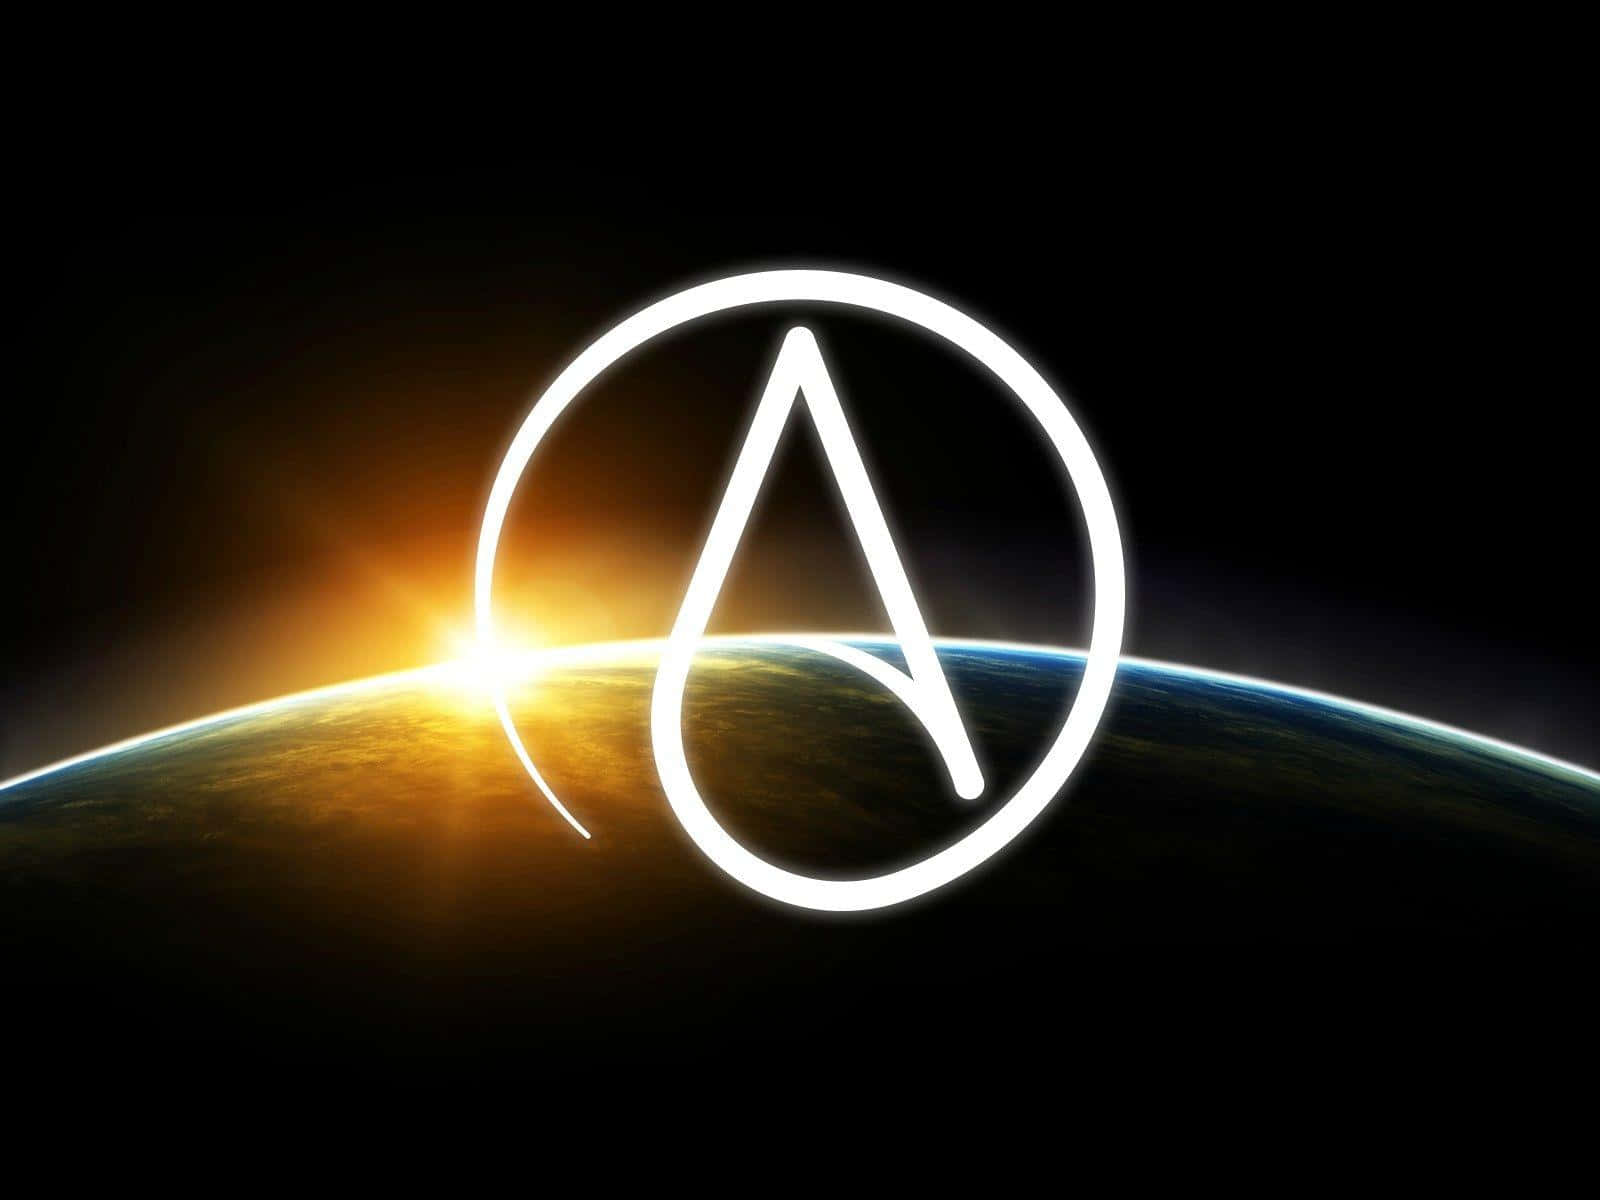 Atheism - A Way of Life Wallpaper